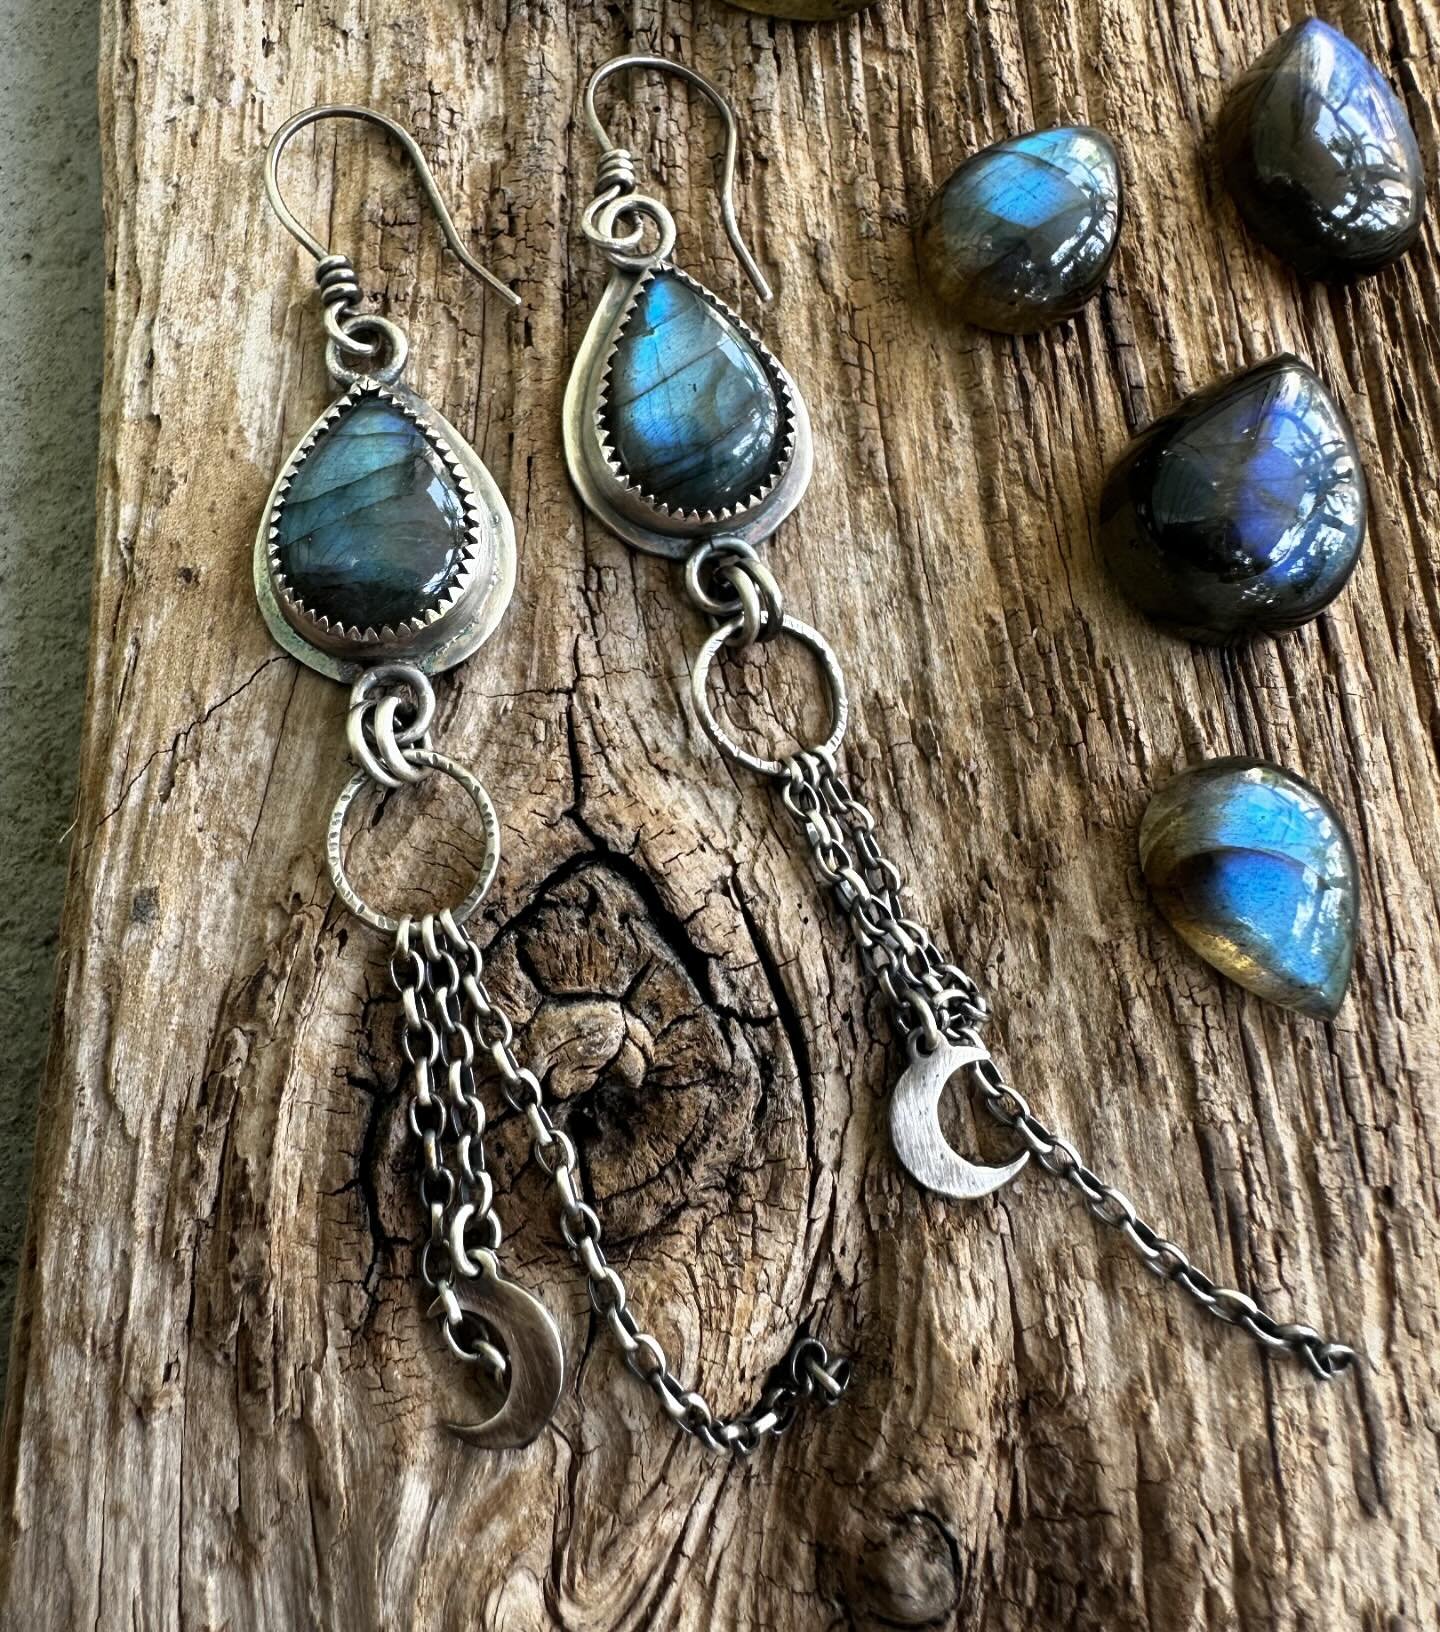 Moonlight earrings now available on the website. Link in bio 
#labradorite